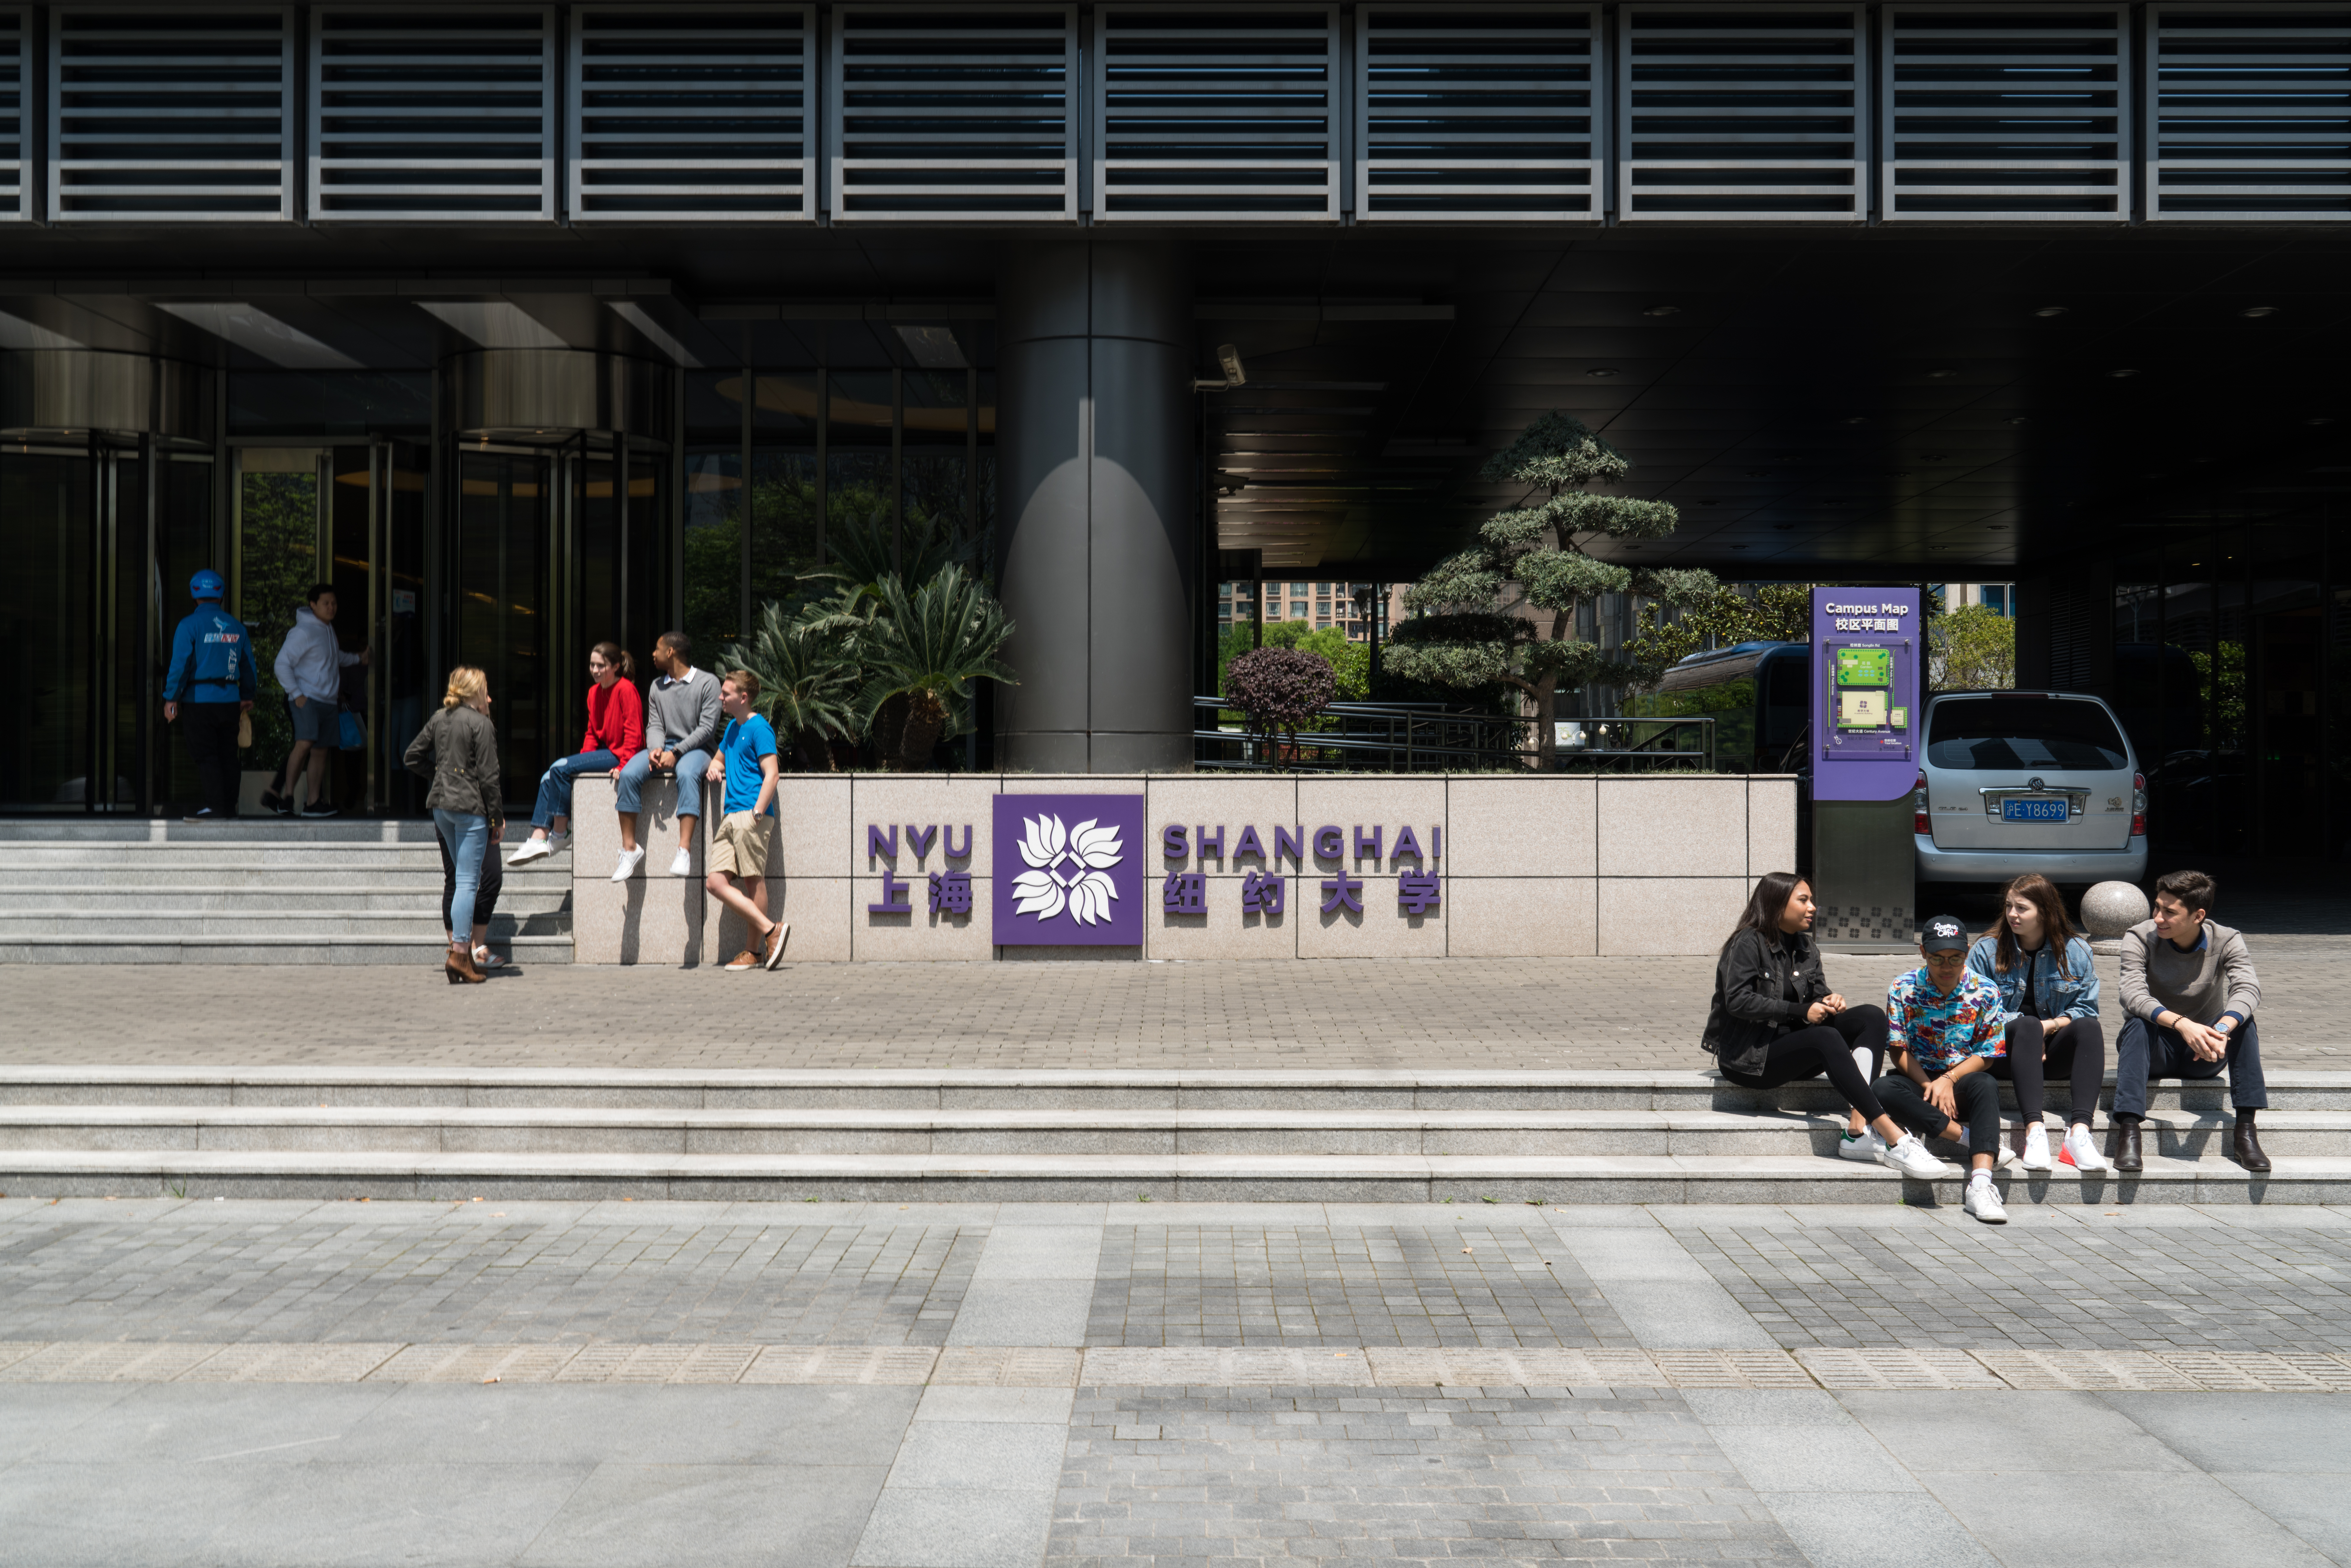 Students sitting in front of the entrance of the former NYU Shanghai academic building.